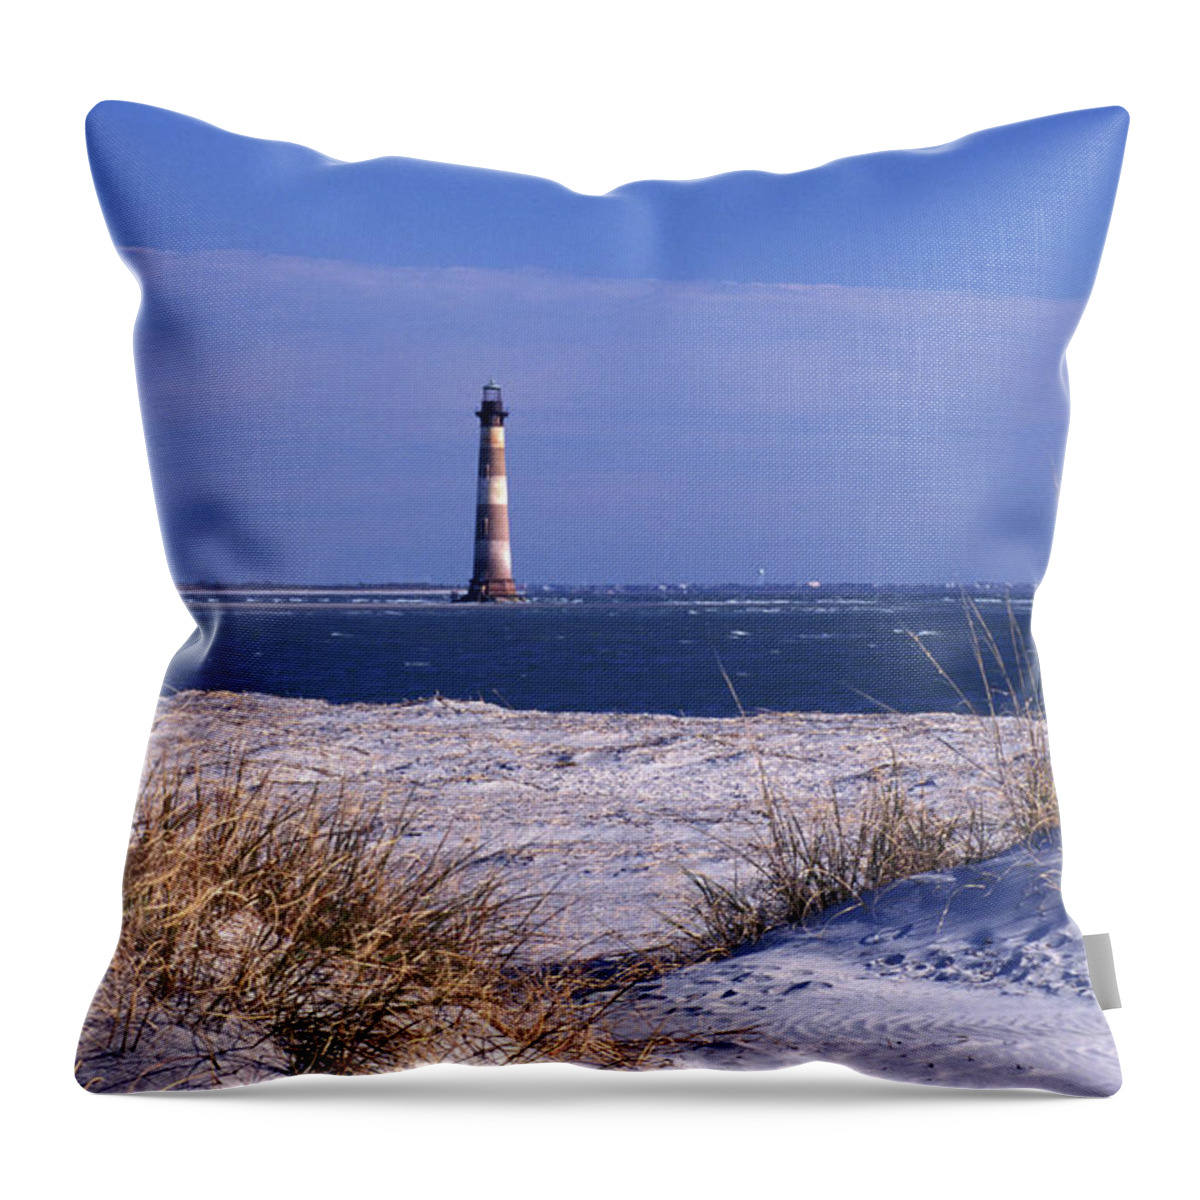 Water's Edge Throw Pillow featuring the photograph Morris Island Lighthouse At Folley Beach by Photorx